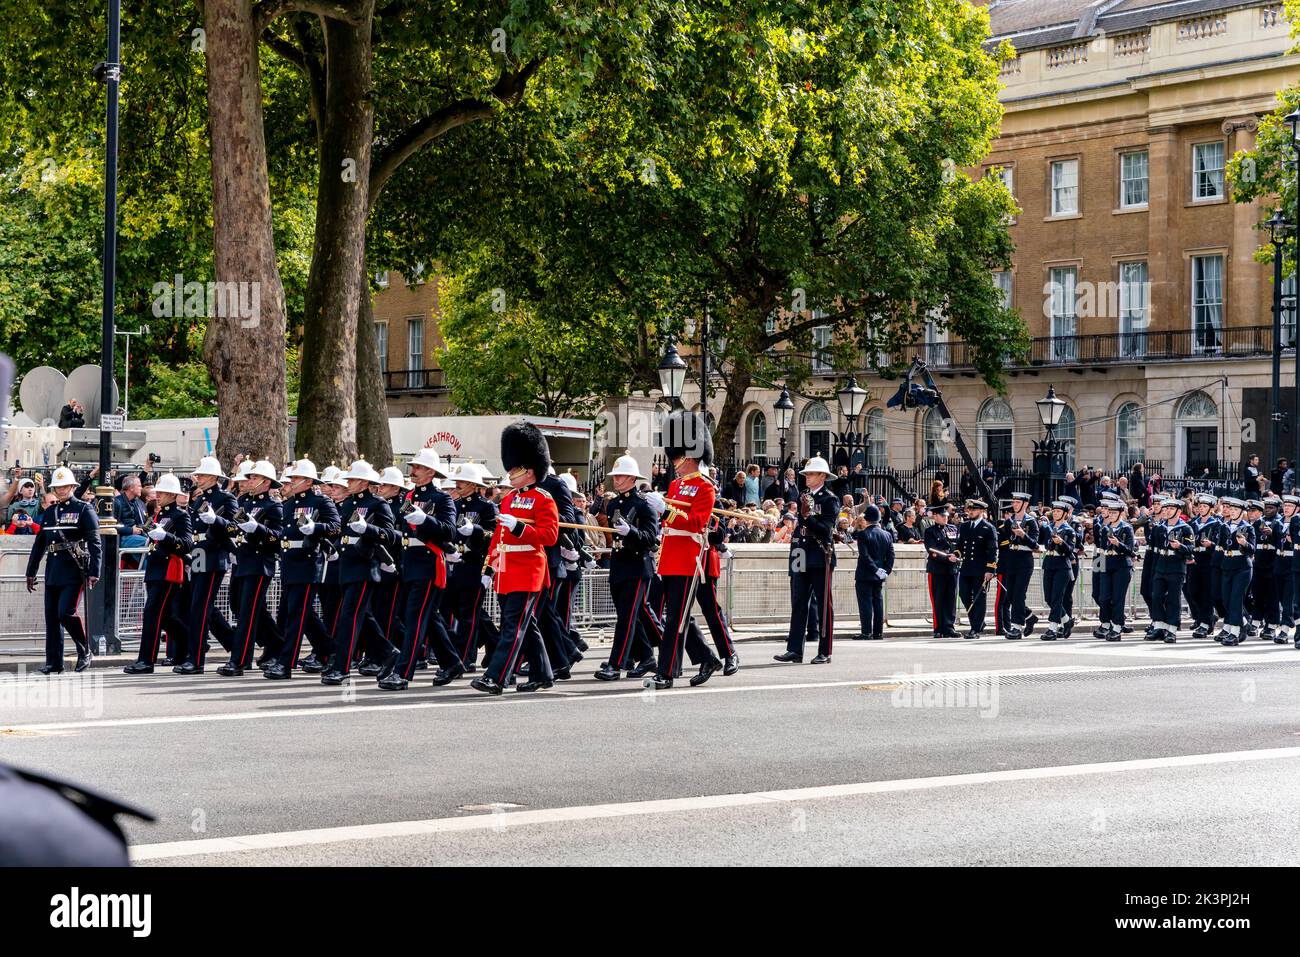 Members Of The Royal Navy March Up Whitehall As Part Of The Queen Elizabeth II Funeral Procession, Whitehall, London, UK. Stock Photo